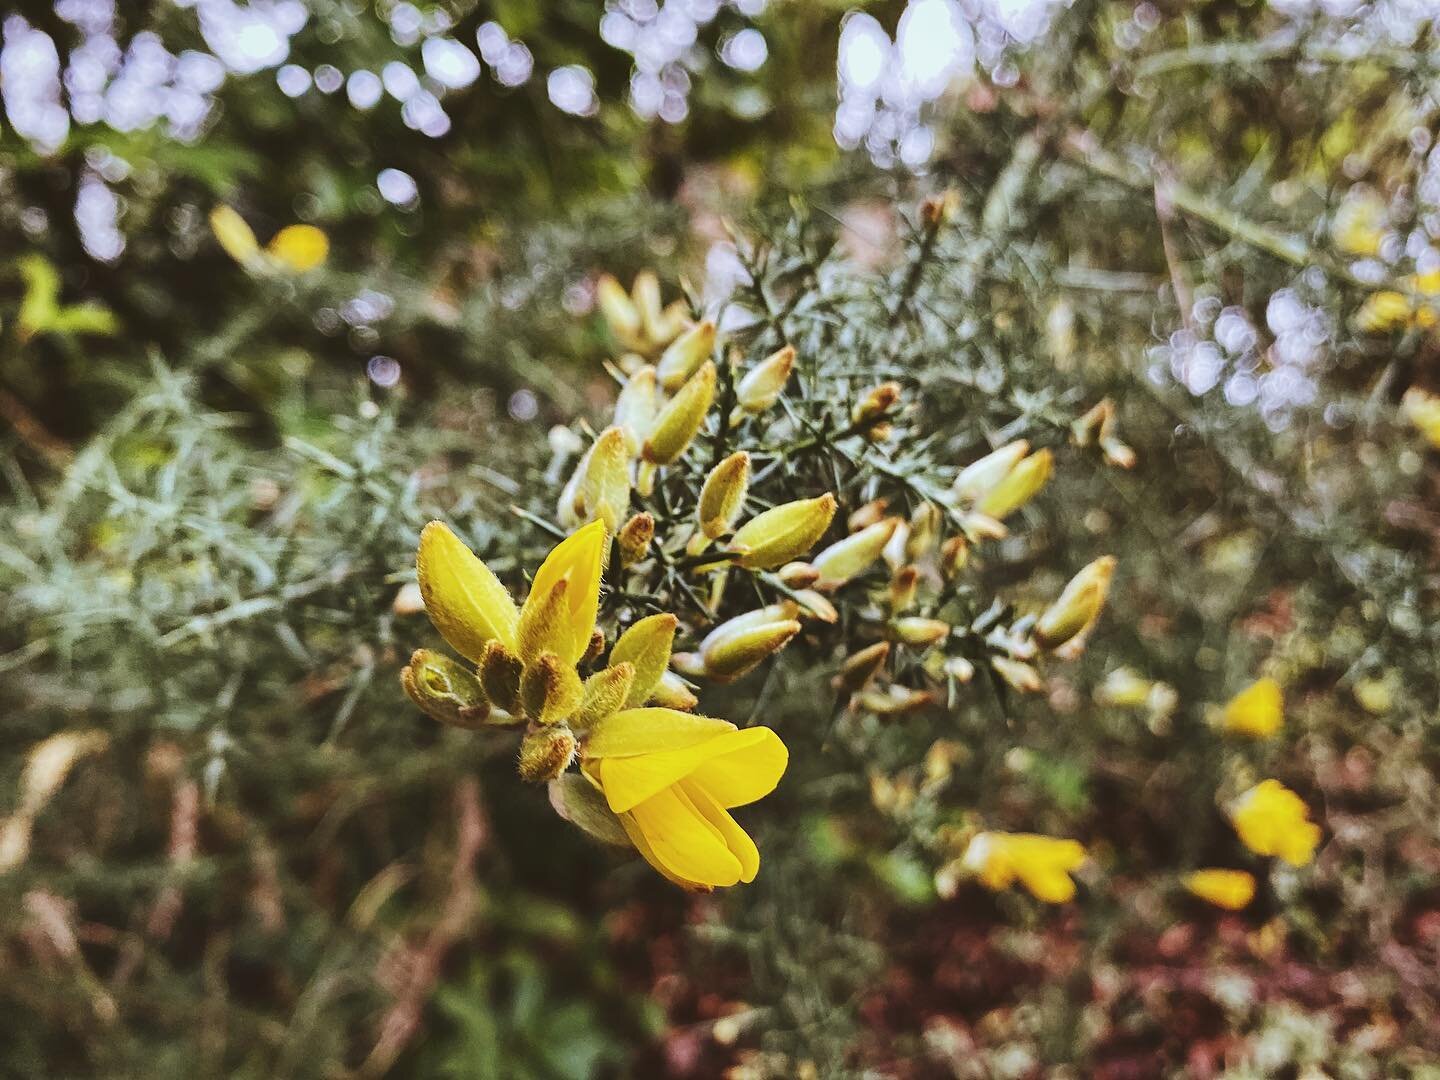 The Gorse family not only shows off bright and early colour starting in January but also provides important shelter and habitats for many species of birds and are vital to pollinators during the winter months.

&bull;
&bull;
&bull;
#wildlife #wildlif